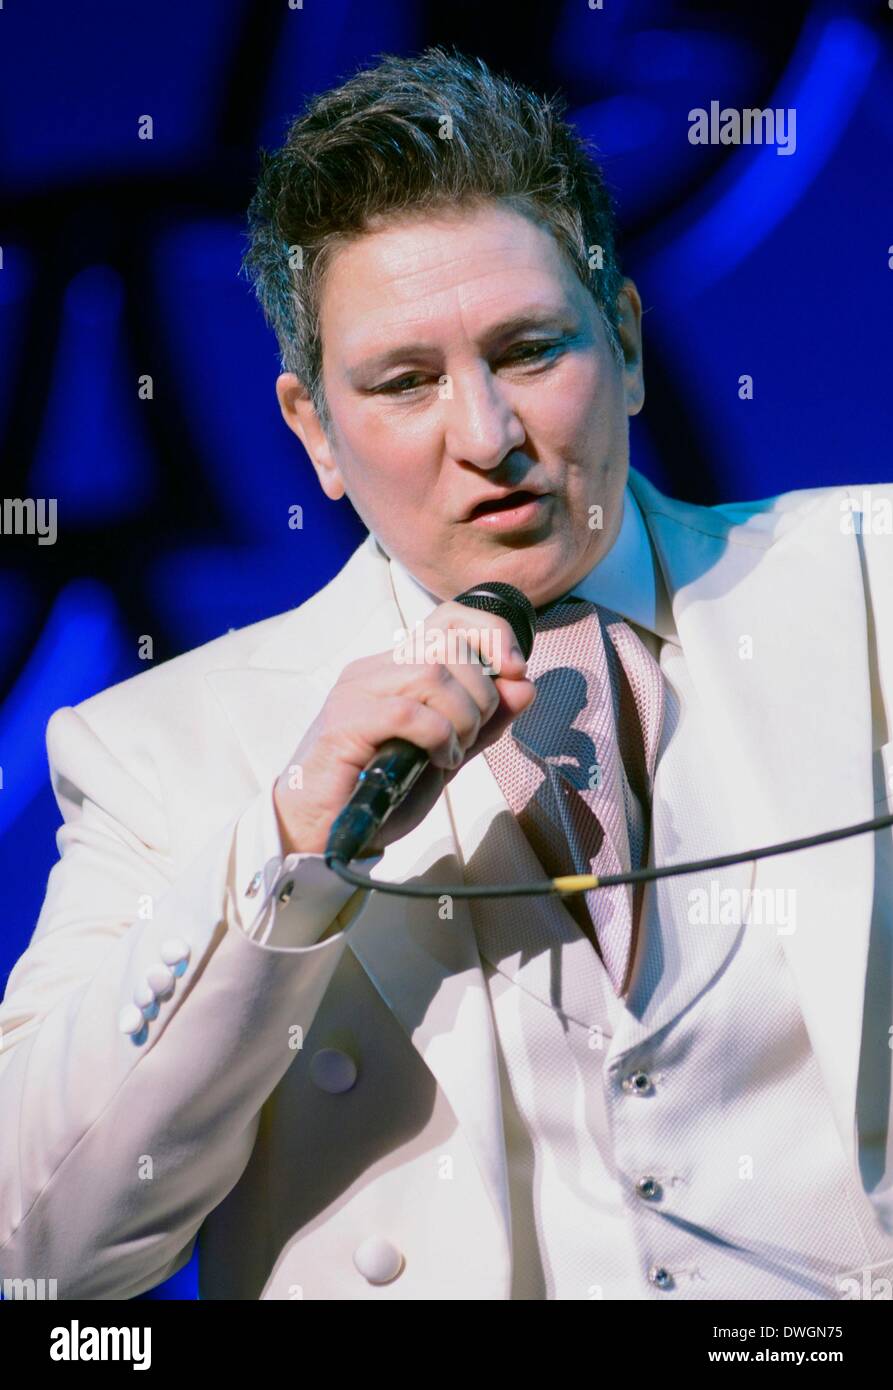 New York Ny Usa 7th Mar 2014 Kd Lang In Attendance For Kd Lang Performs Hallelujah To 